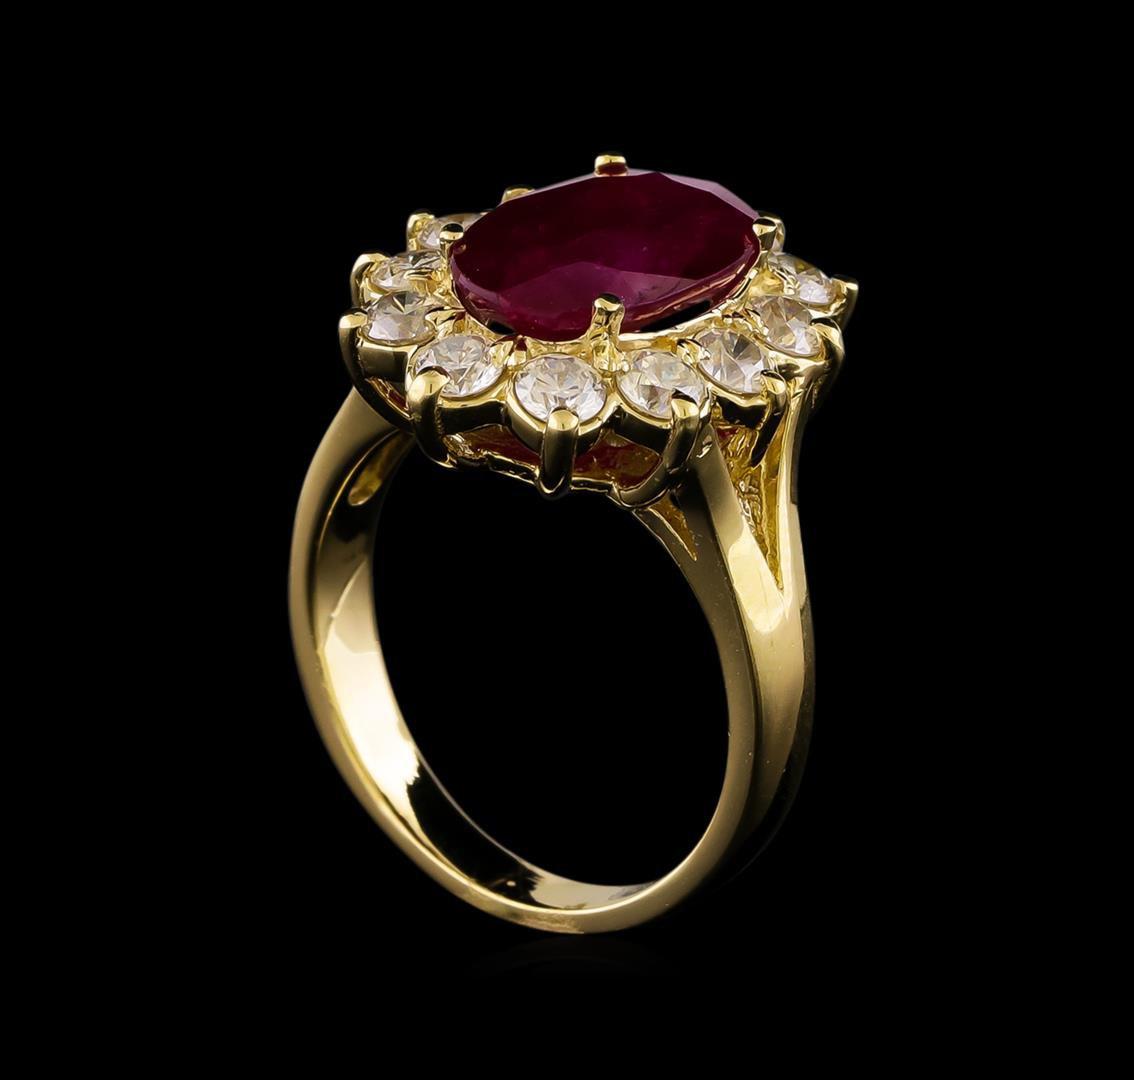 GIA Cert 3.52 ctw Ruby and Diamond Ring - 14KT Yellow Gold